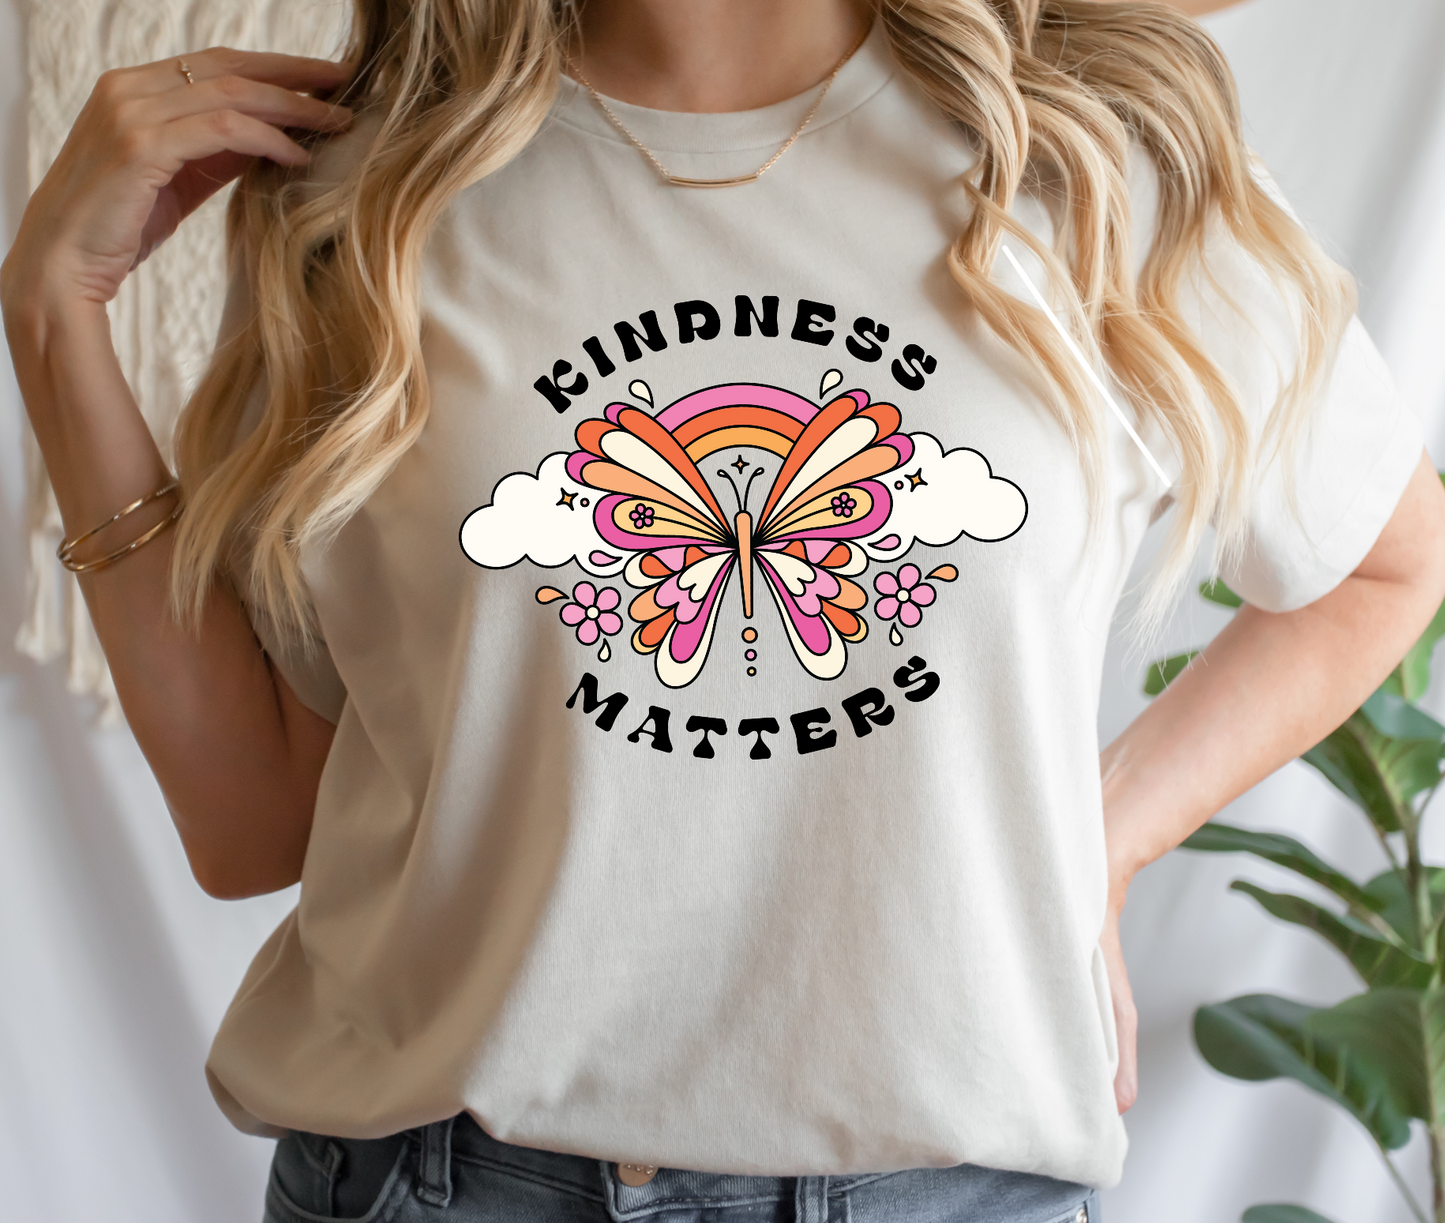 Kindness Matters LAST CHANCE DTF